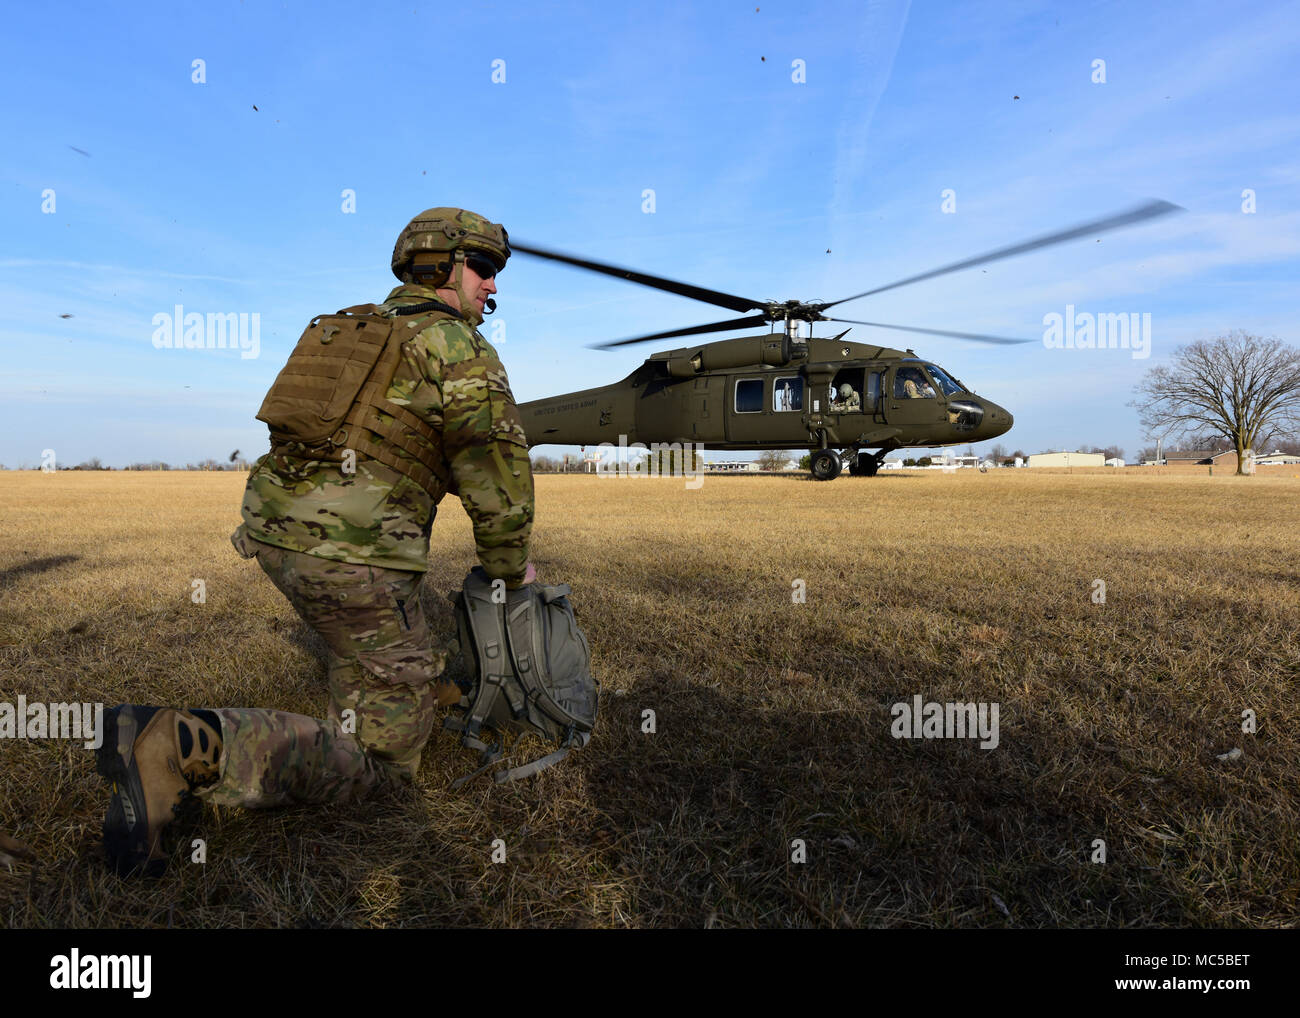 A Joint Terminal Attack Controller assigned to the 7th Air Support Operations Squadron, located in Fort Bliss, Texas, waits for a UH-0 Black Hawk land during a joint training at Warsaw, Mo., Jan. 31, 2018. JTACs are personnel who are authorized to call airstrikes and help coordinate close-air-support missions. (U.S. Air Force by Staff Sgt. Danielle Quilla) Stock Photo